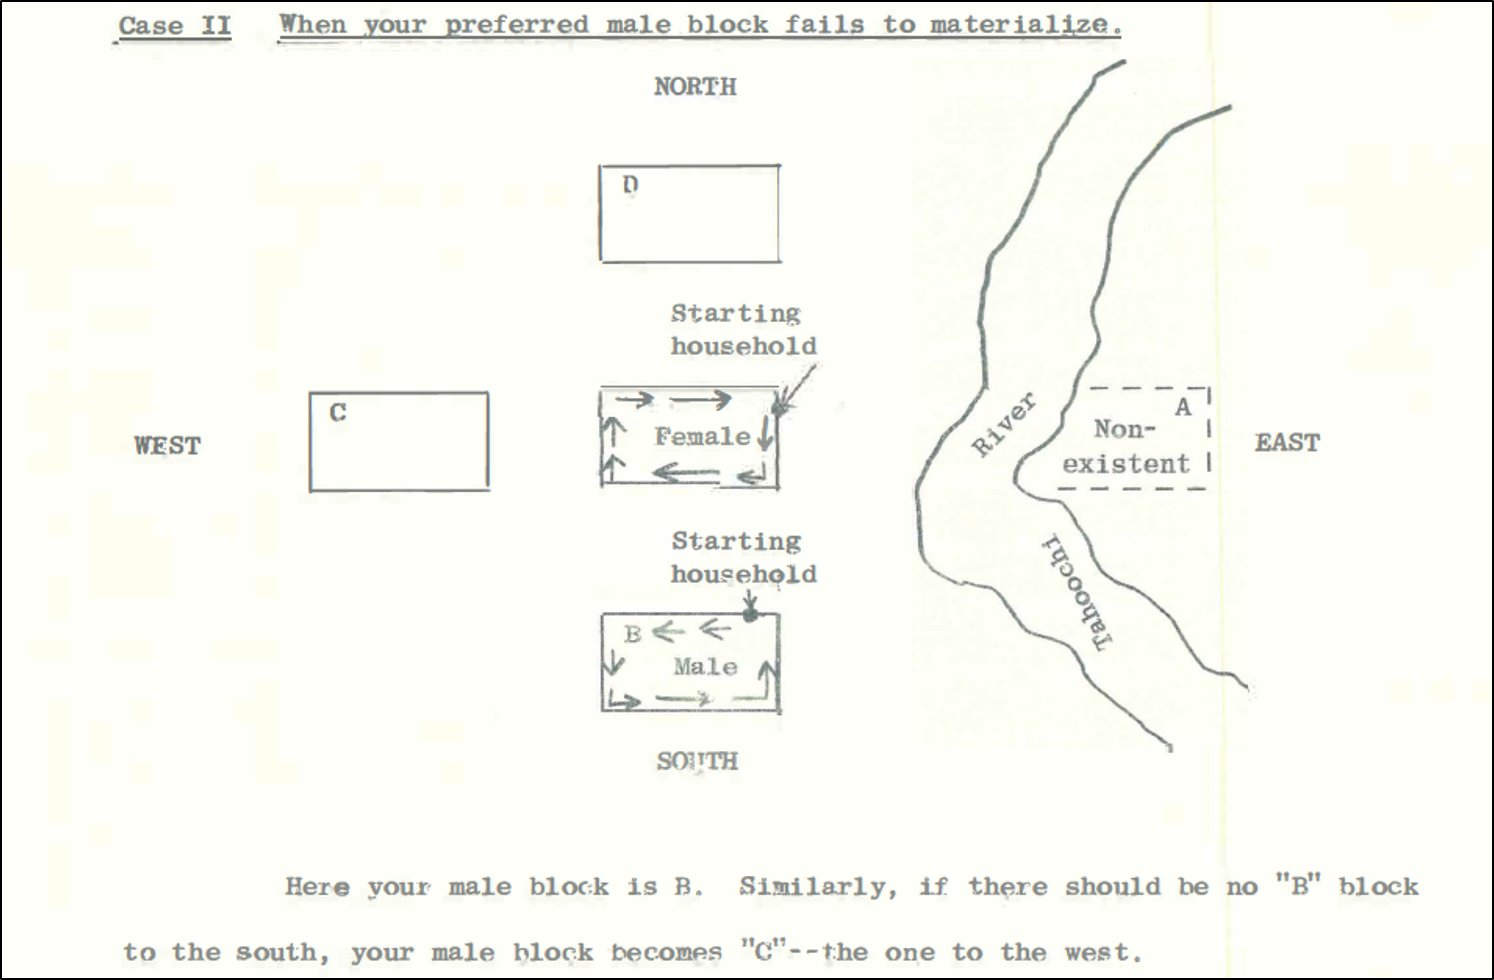 Image from the 1962 Roper Interviewers' Handbook